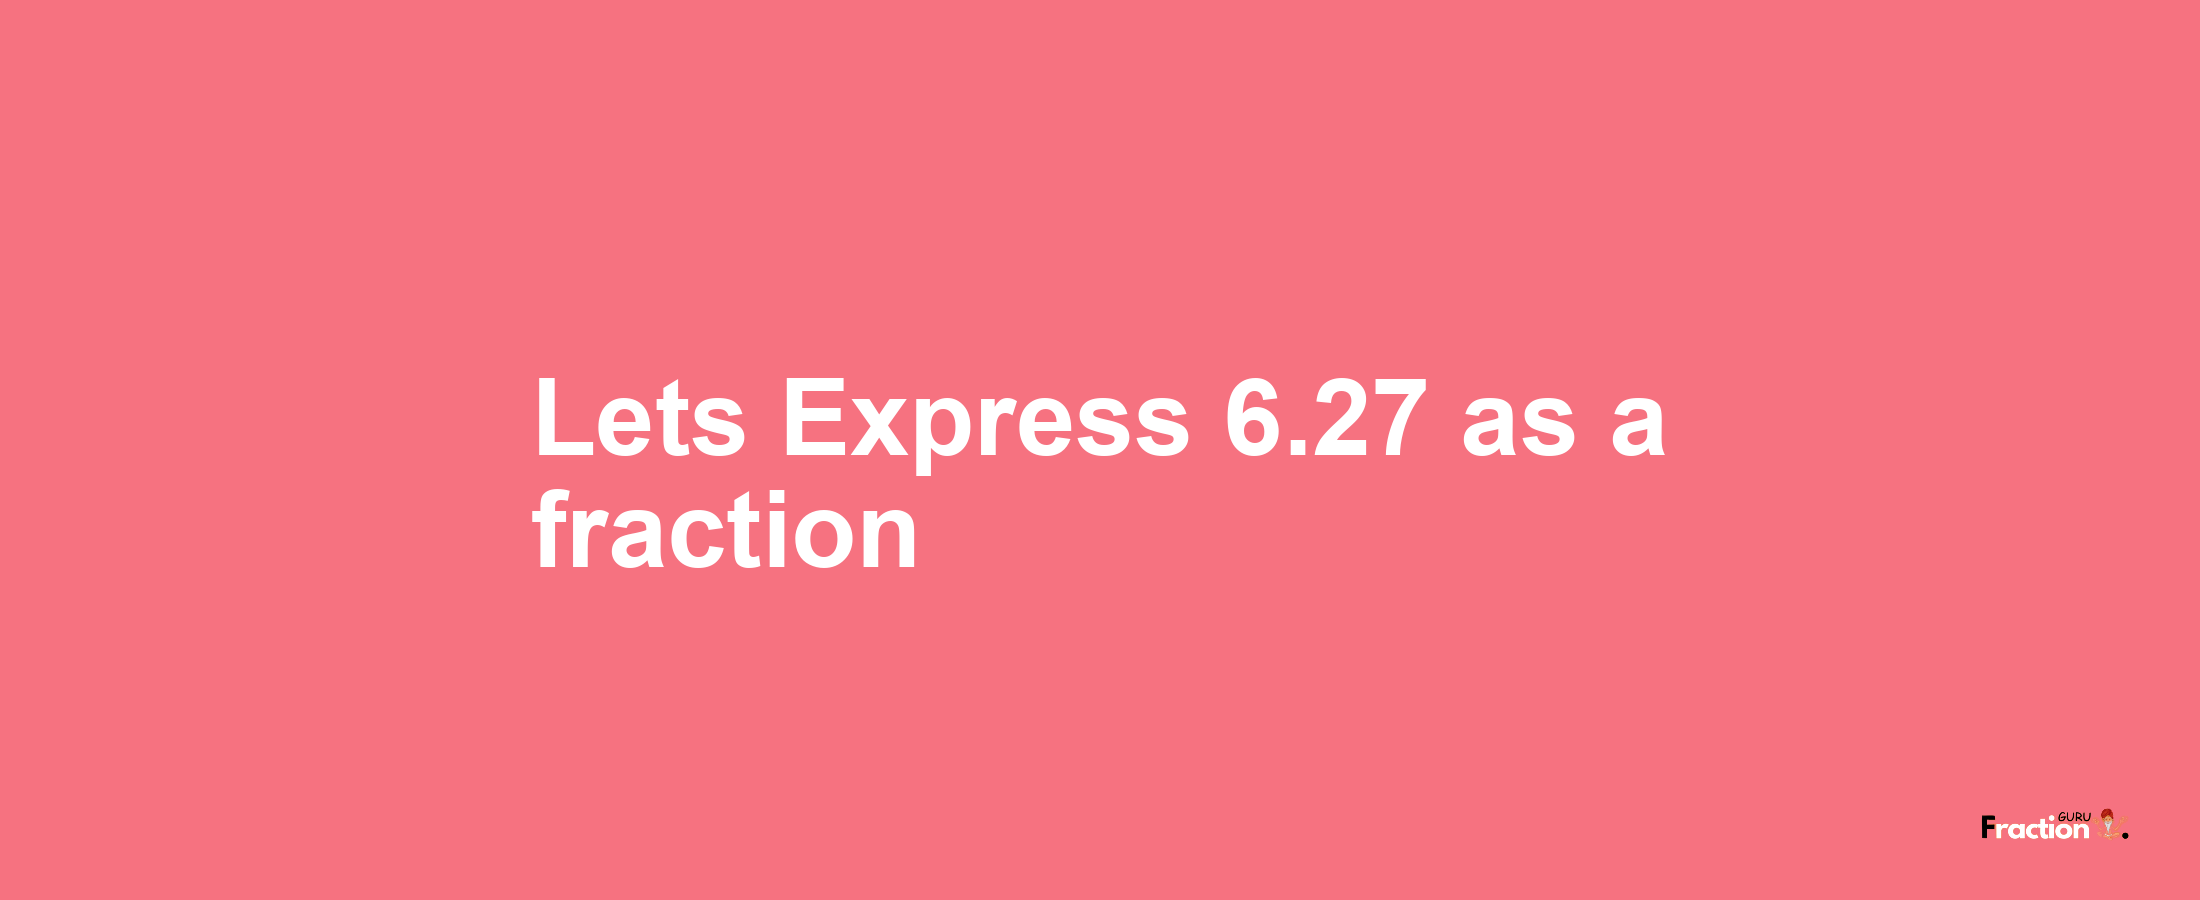 Lets Express 6.27 as afraction